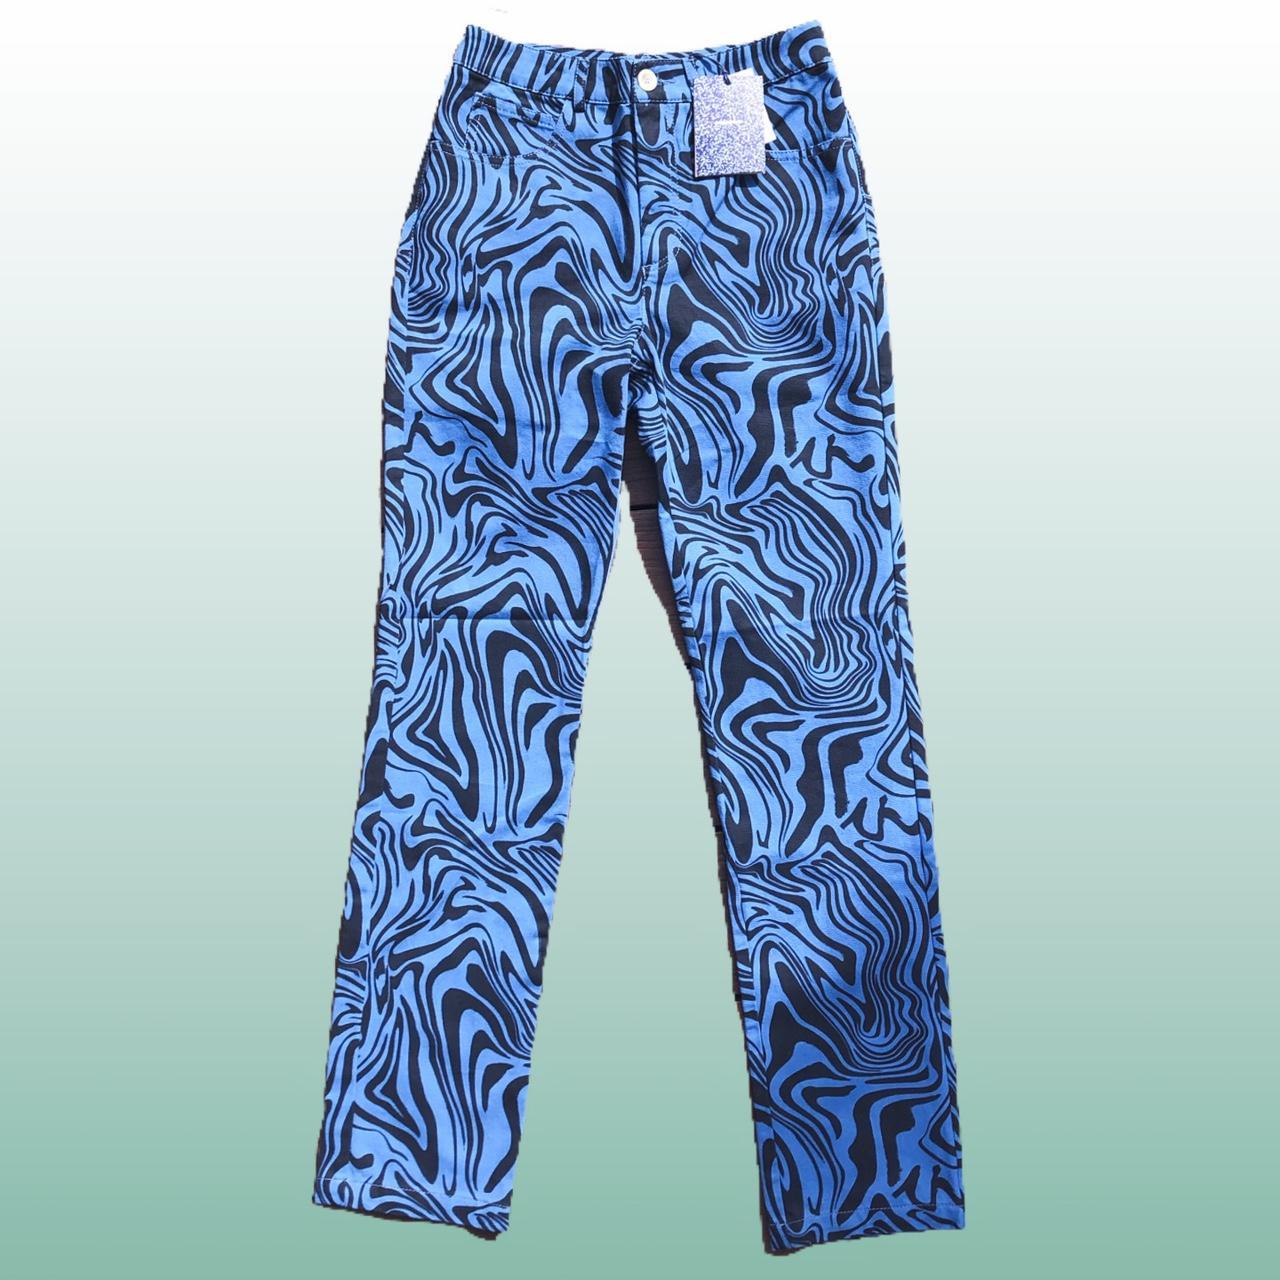 Product Image 1 - Kelly pants in blue
Size: 34